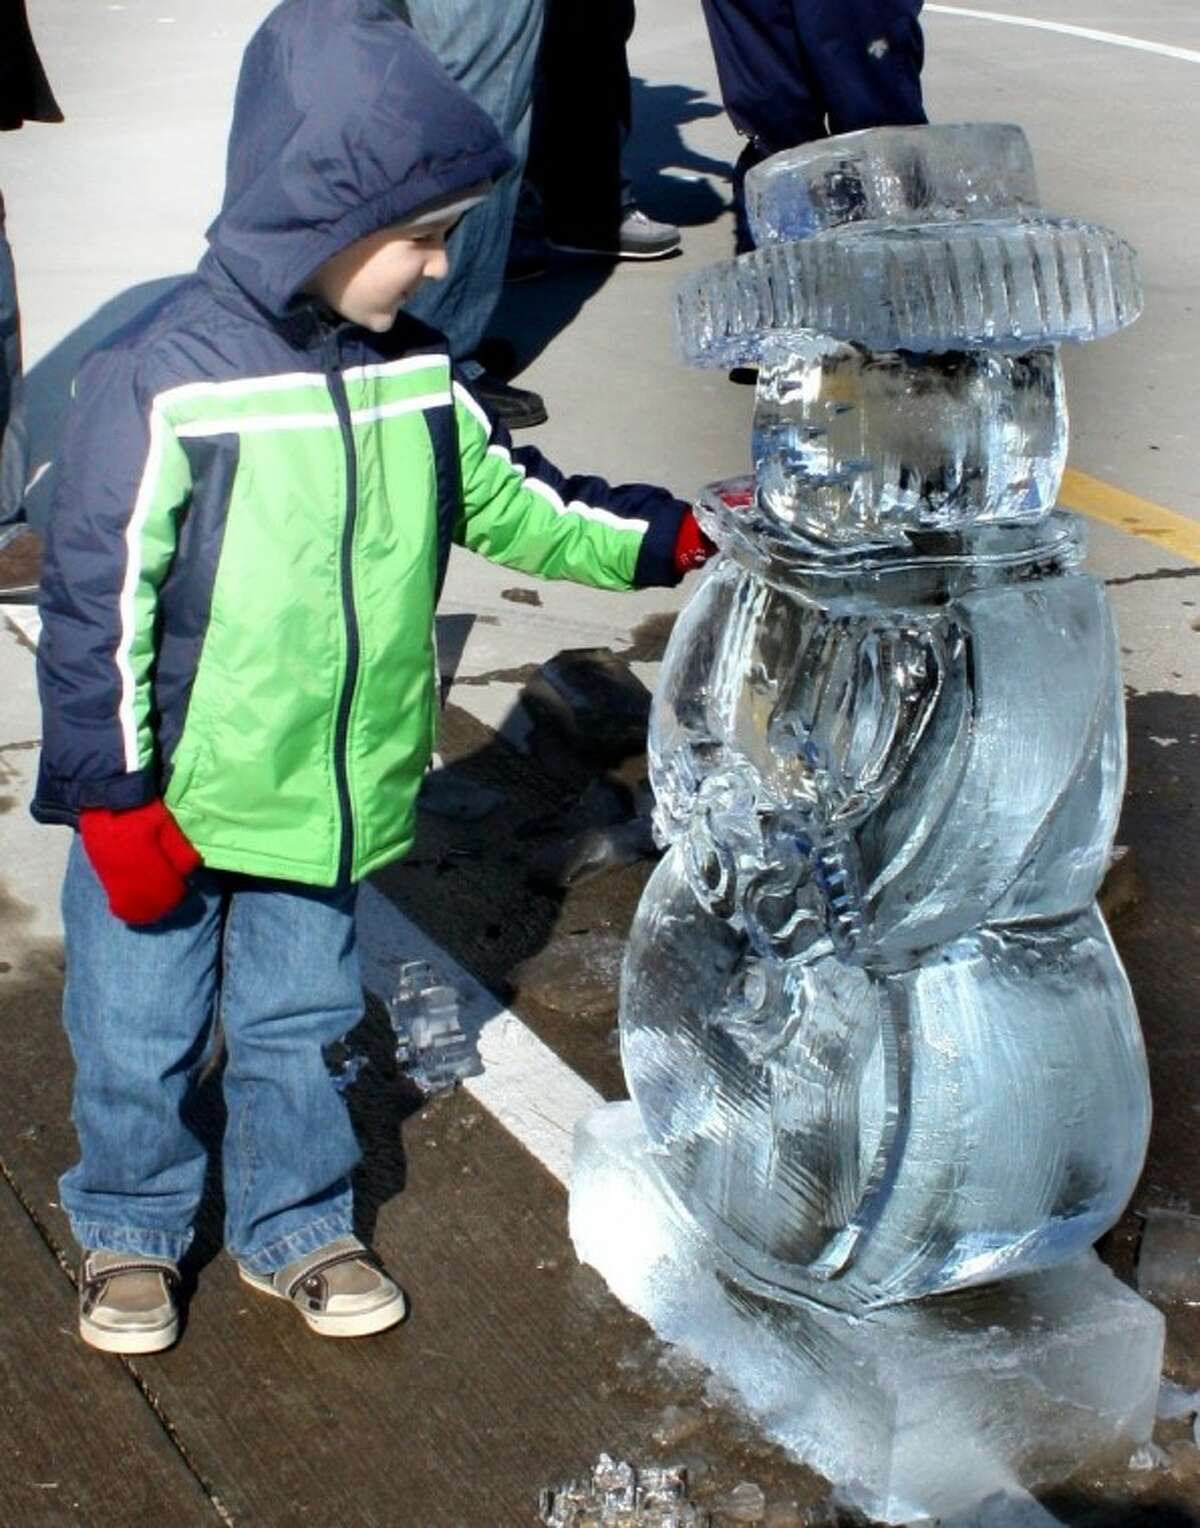 The Fire and Ice Valentine's Festival in Putnam on Saturday will feature professional ice carving demonstrations and ice sculptures. Find out more.